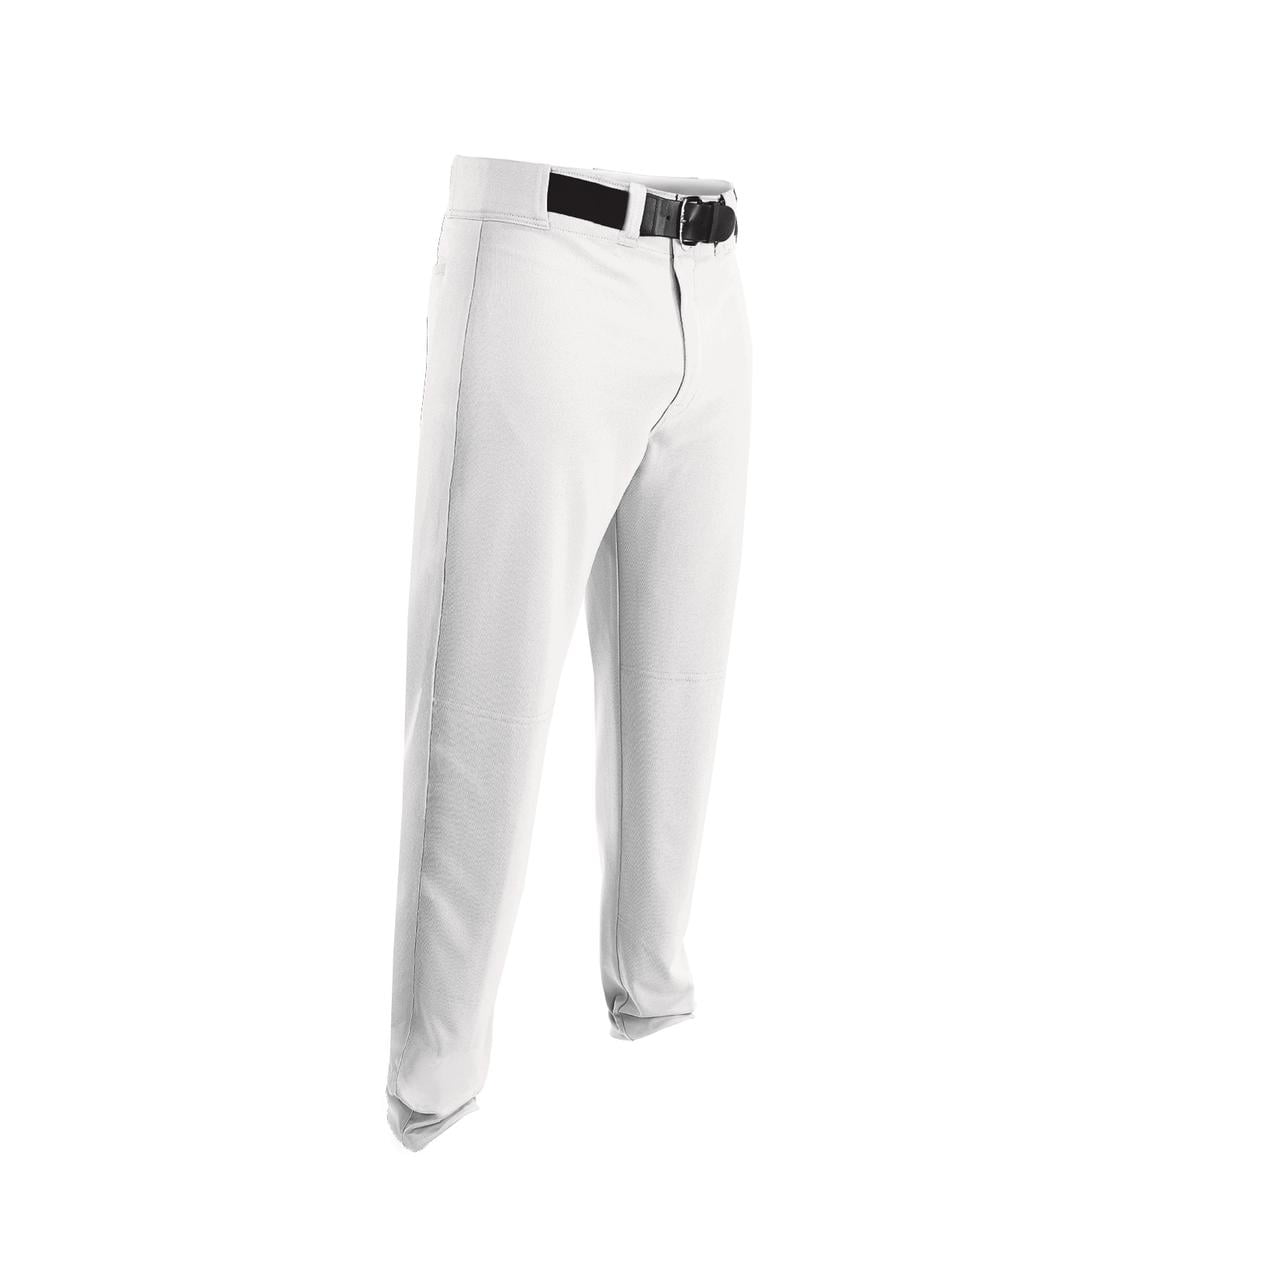 Easton Pro Pull Up Elastic Cuff Baseball Pants NWT Youth S White FREE SHIPPING 